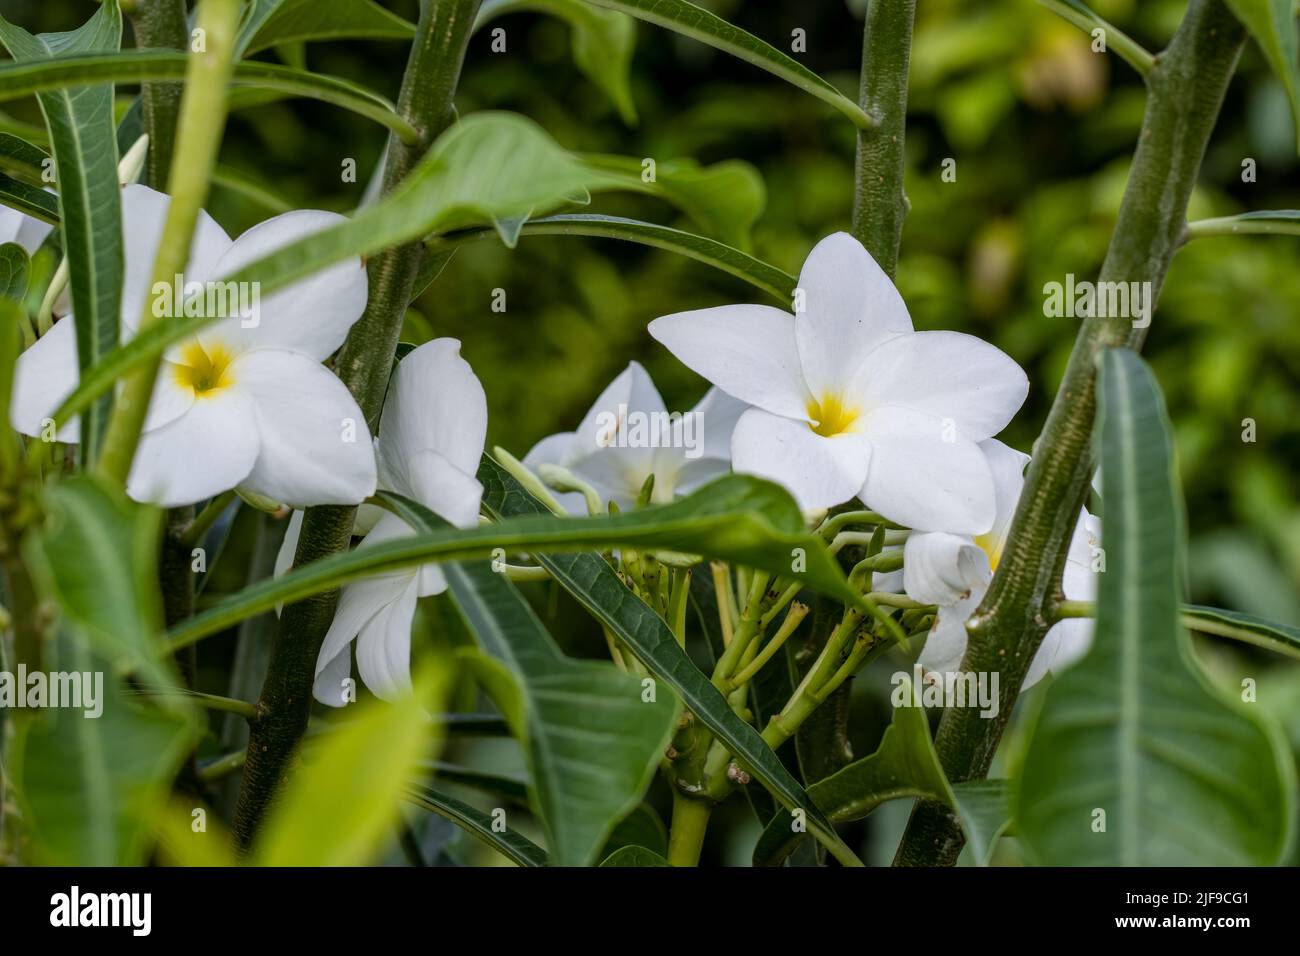 Selective focused fully blossomed white frangipani or plumeria flowers in the garden Stock Photo